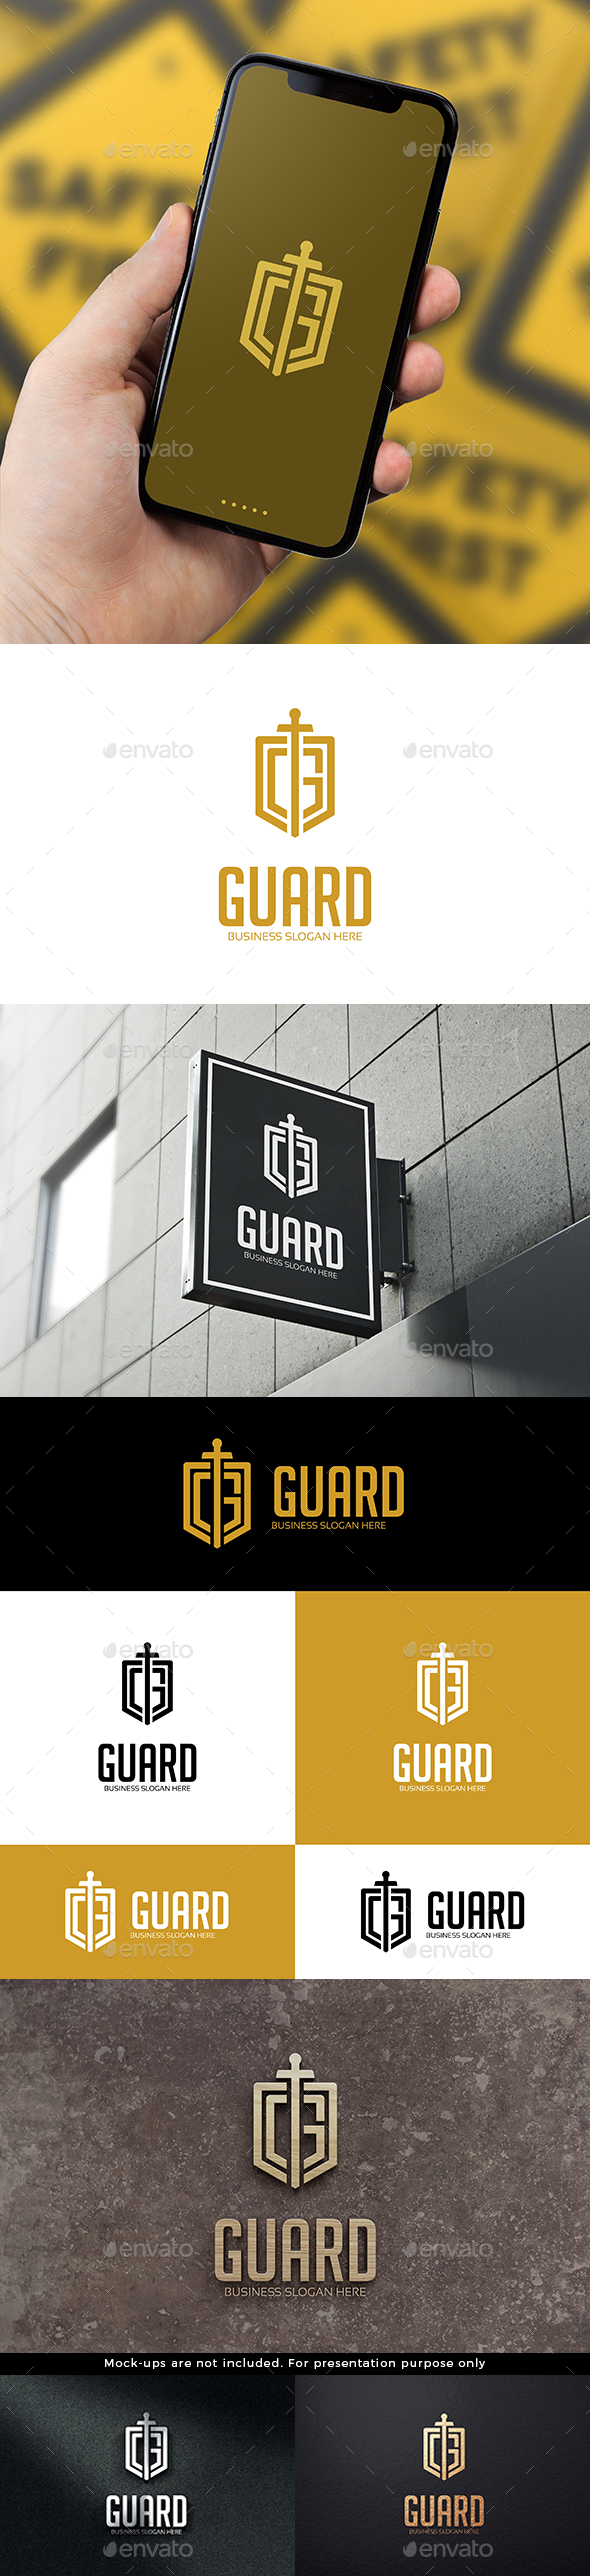 Guard - Letter G Logo Shield and Sword